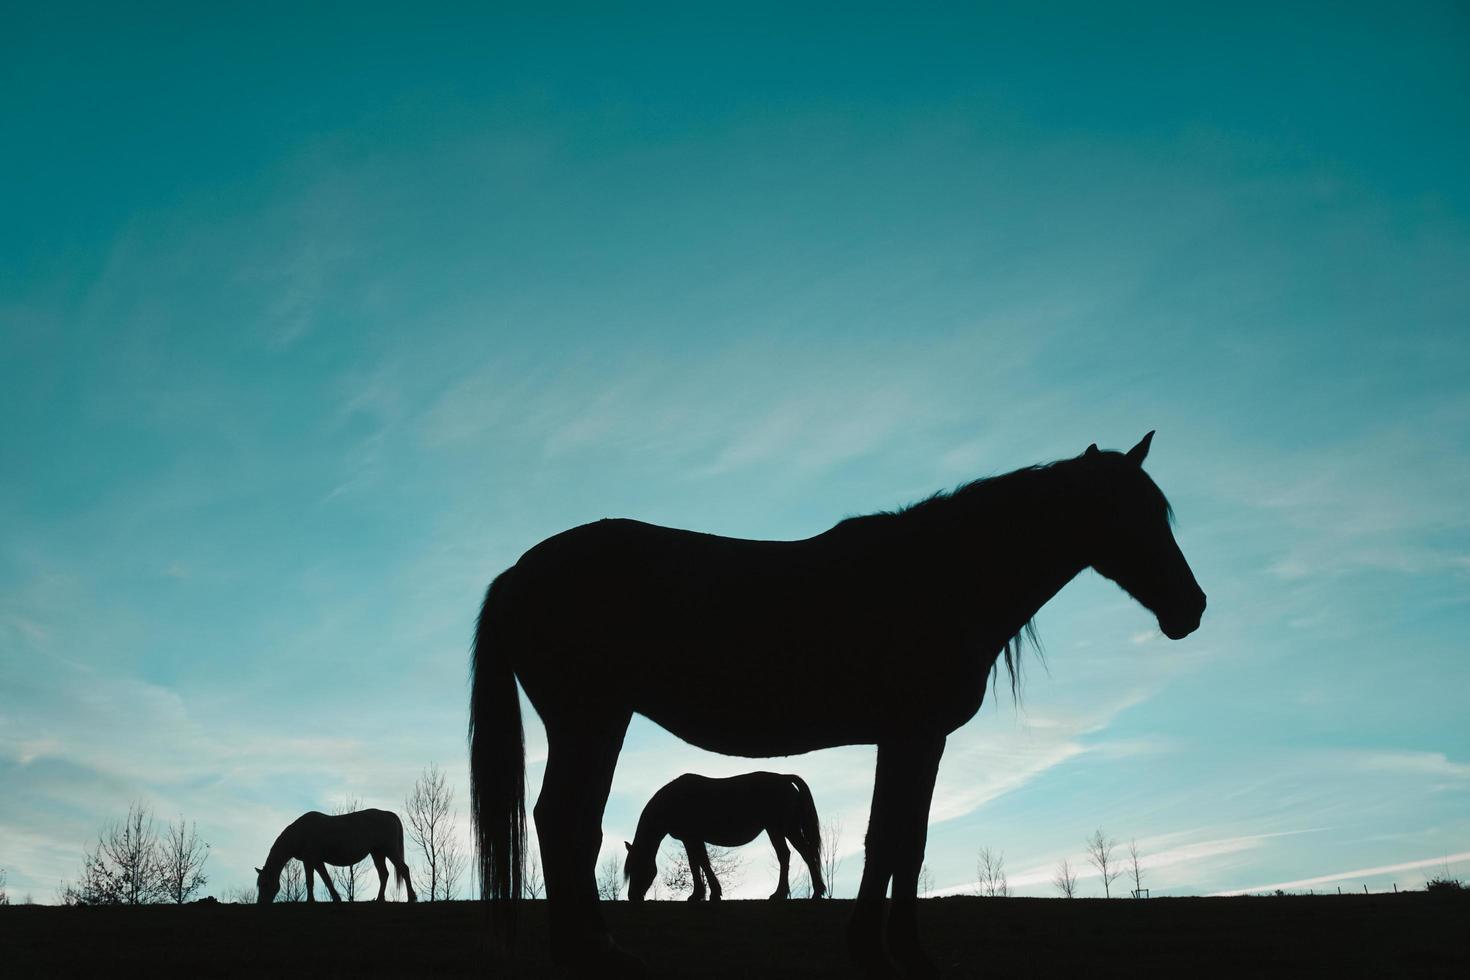 horse silhouette in the meadow with a blue sky, animals in the wild photo